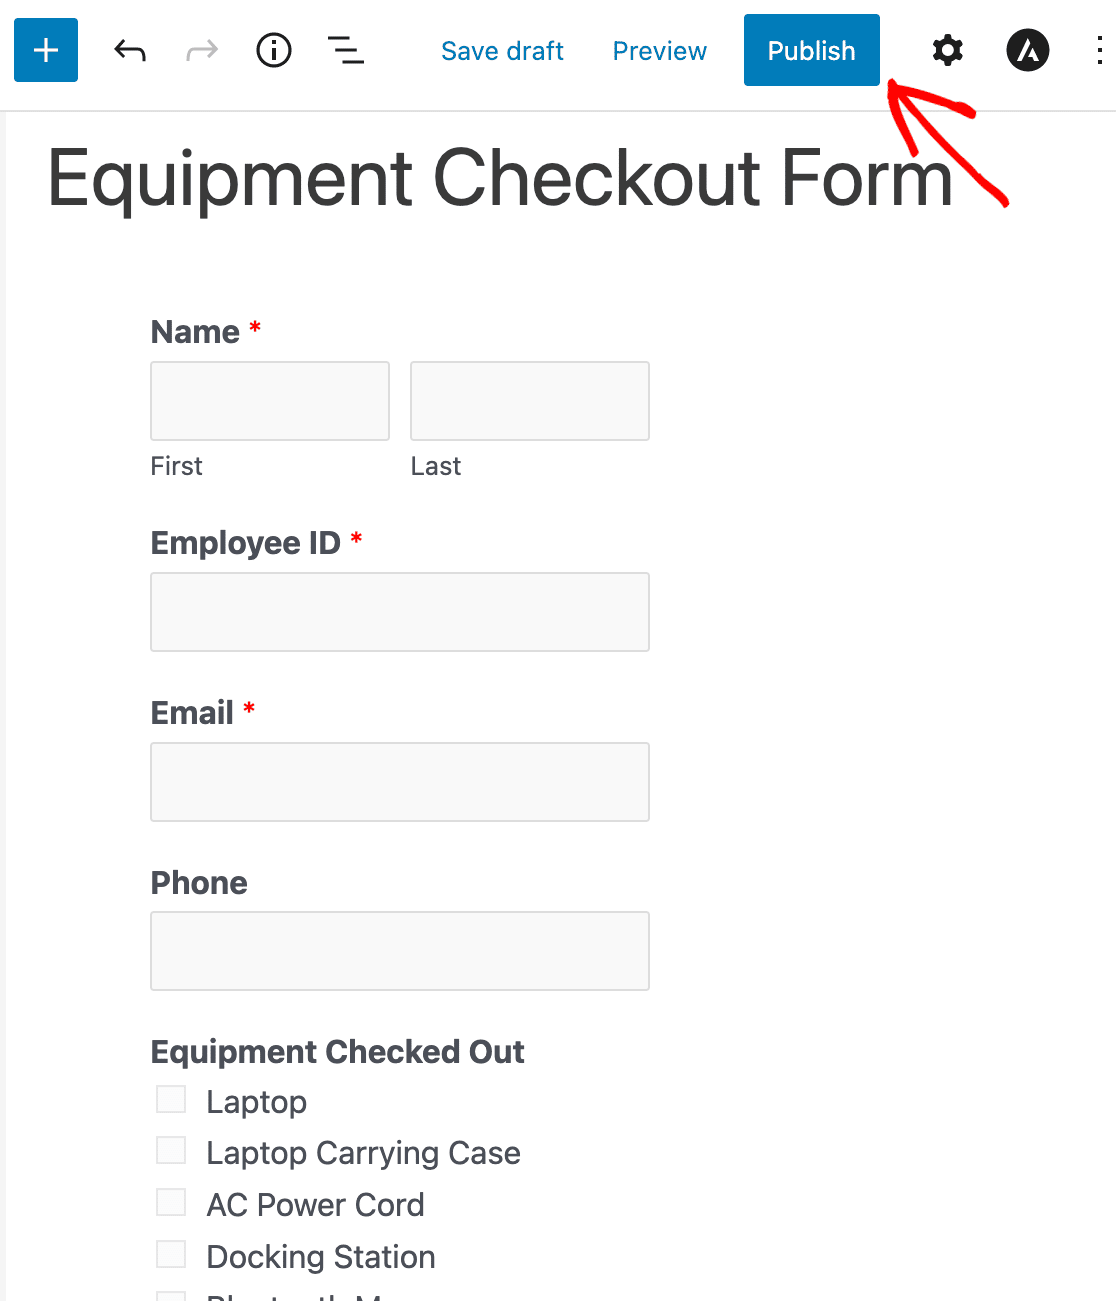 Publishing your equipment checkout form